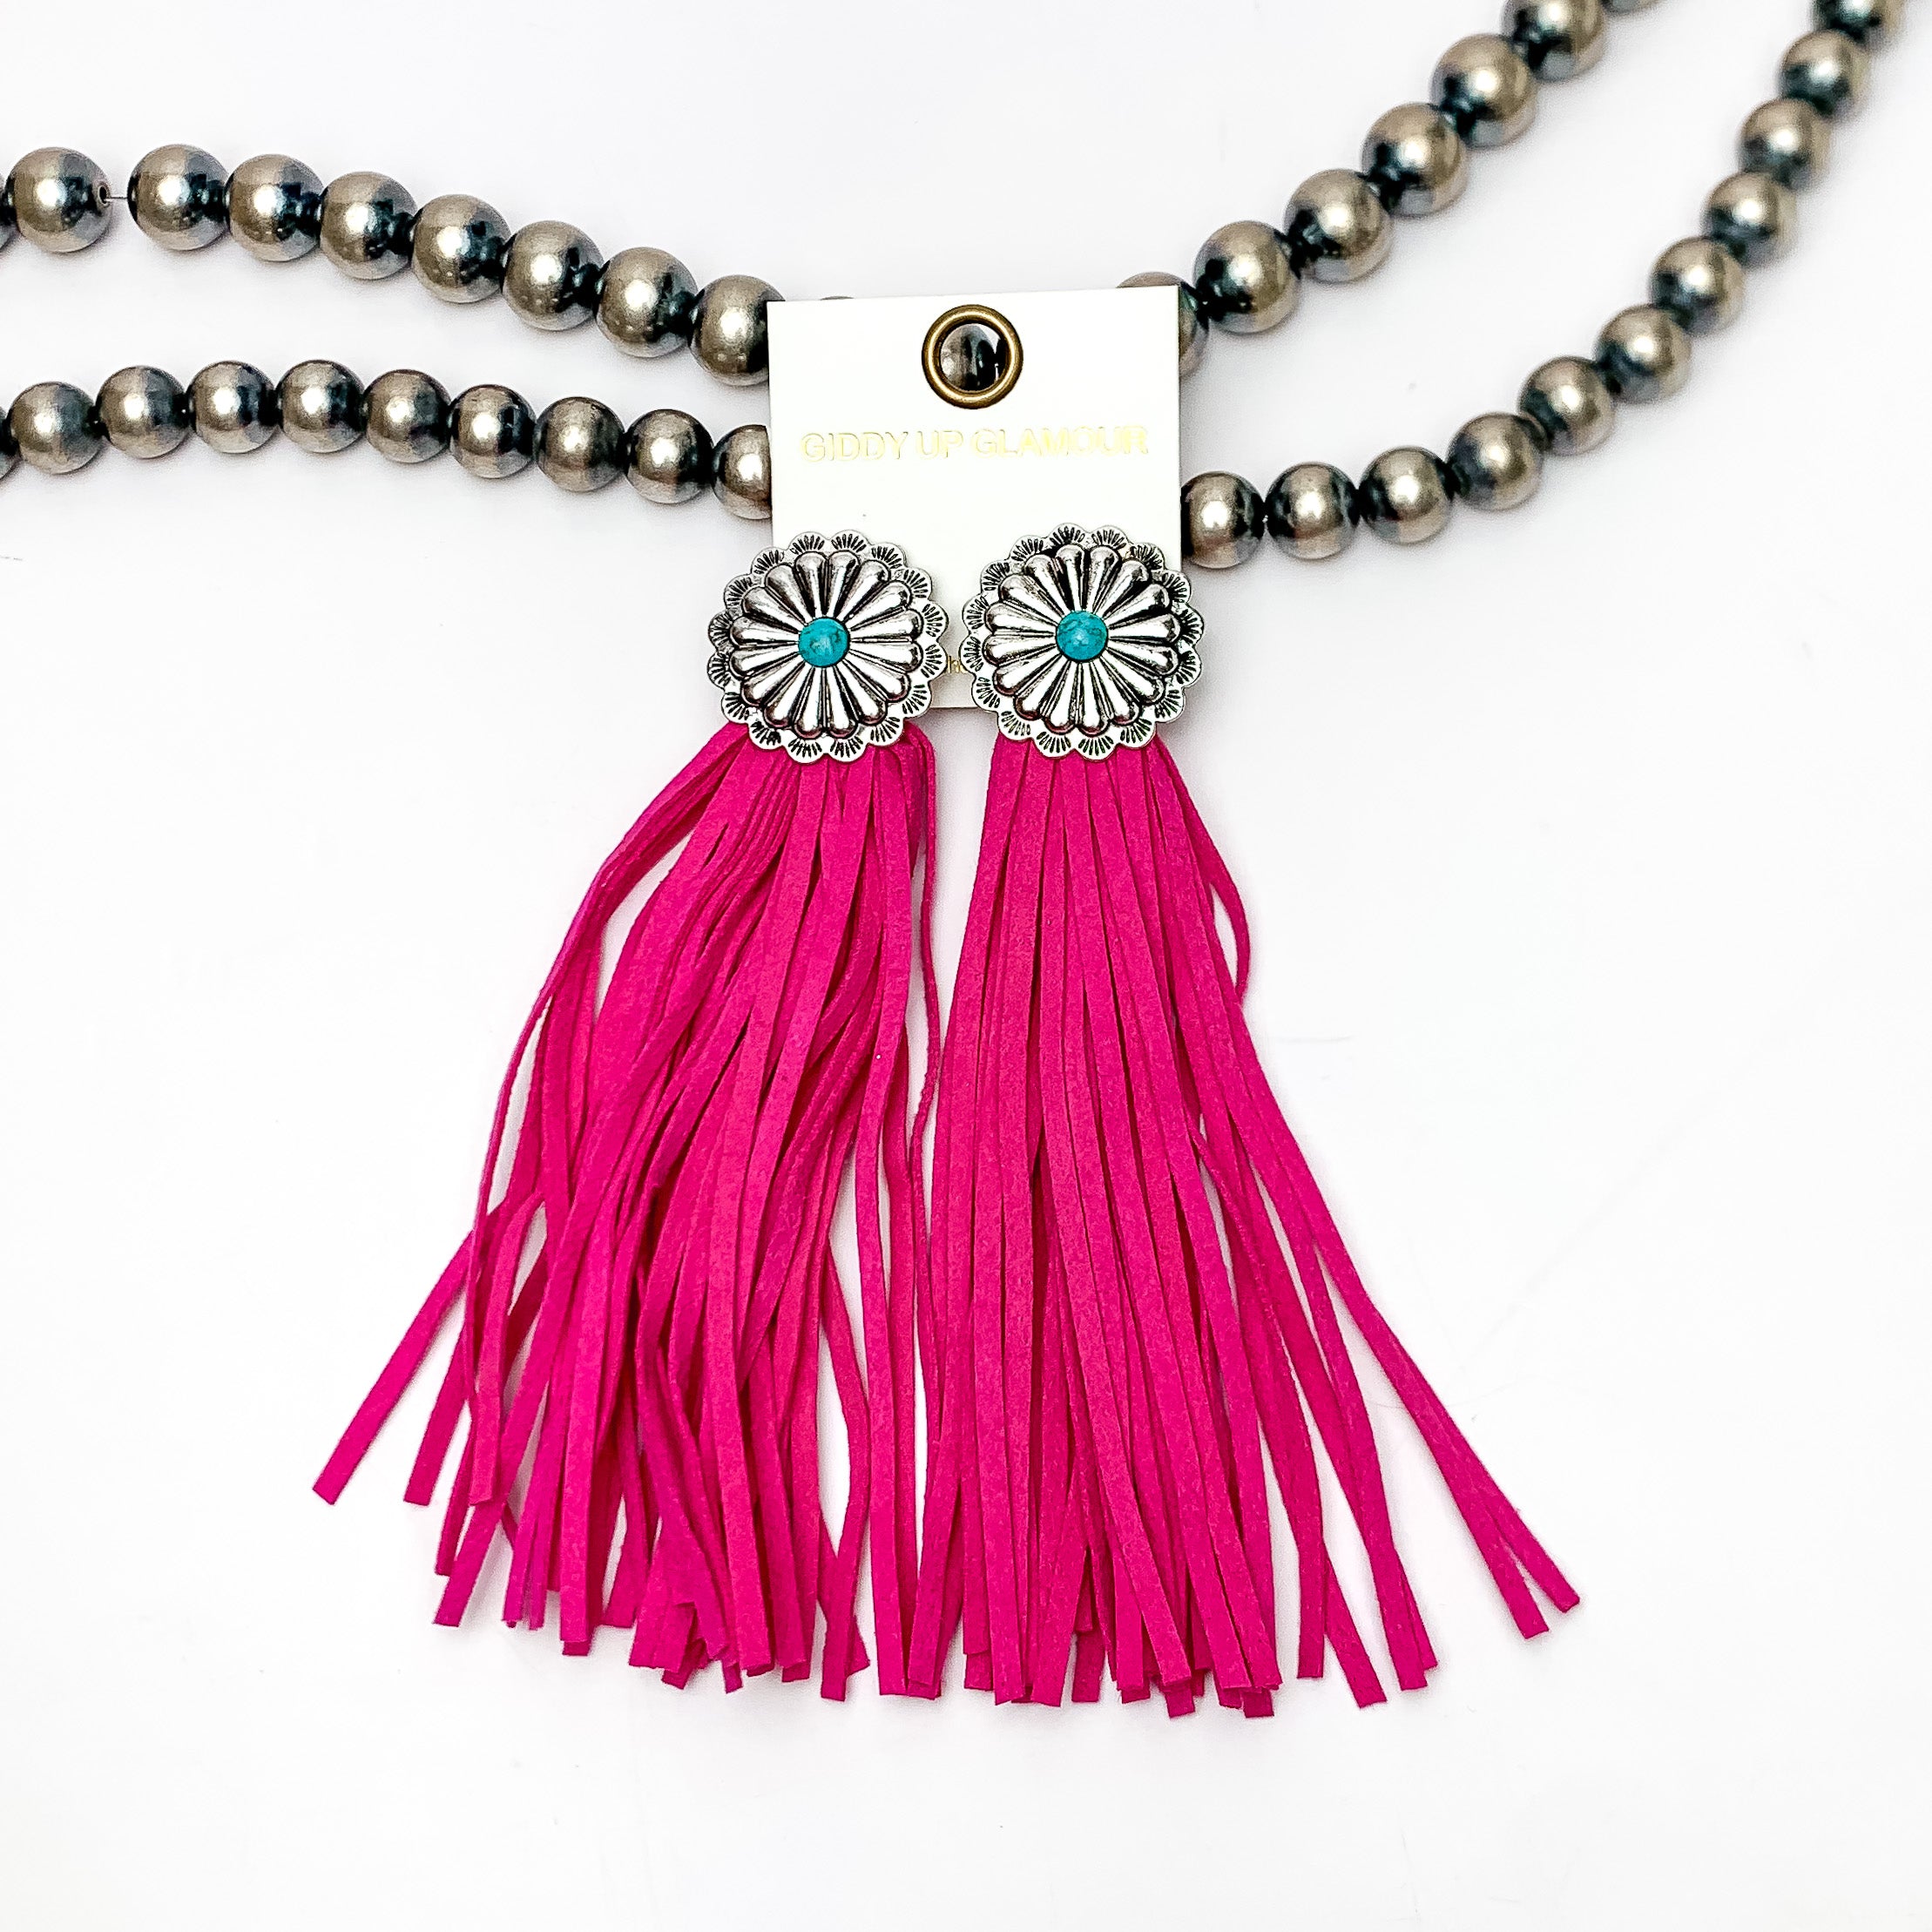 Rodeo Runway Tassel Earrings in Hot Pink. These tassel earrings are pictured on white background with them laying on Navajo peals.